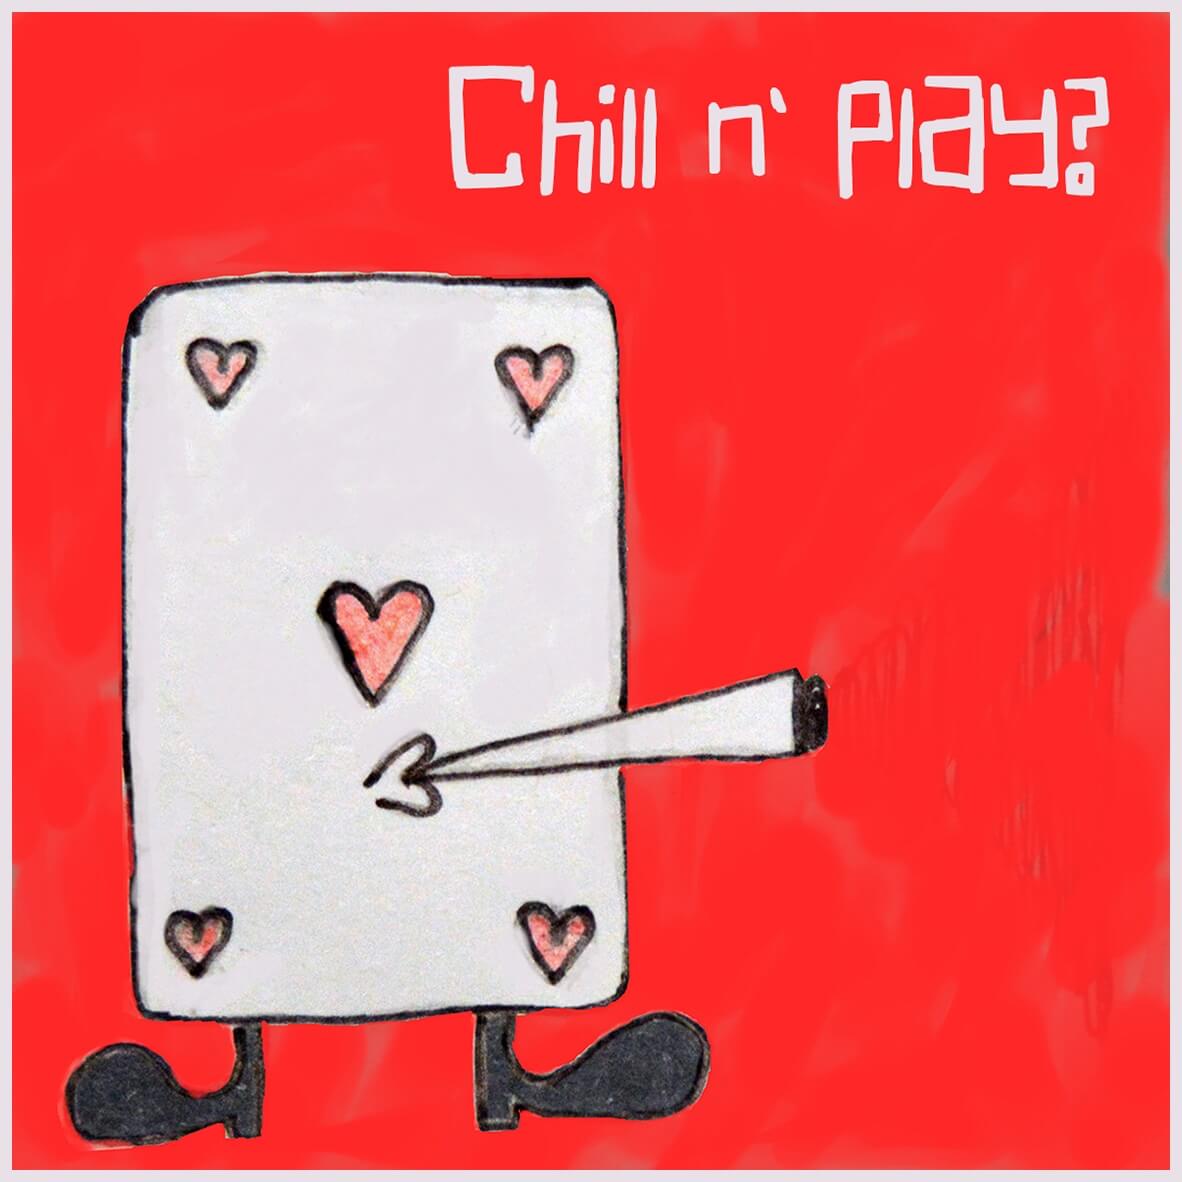 Chill_n_play